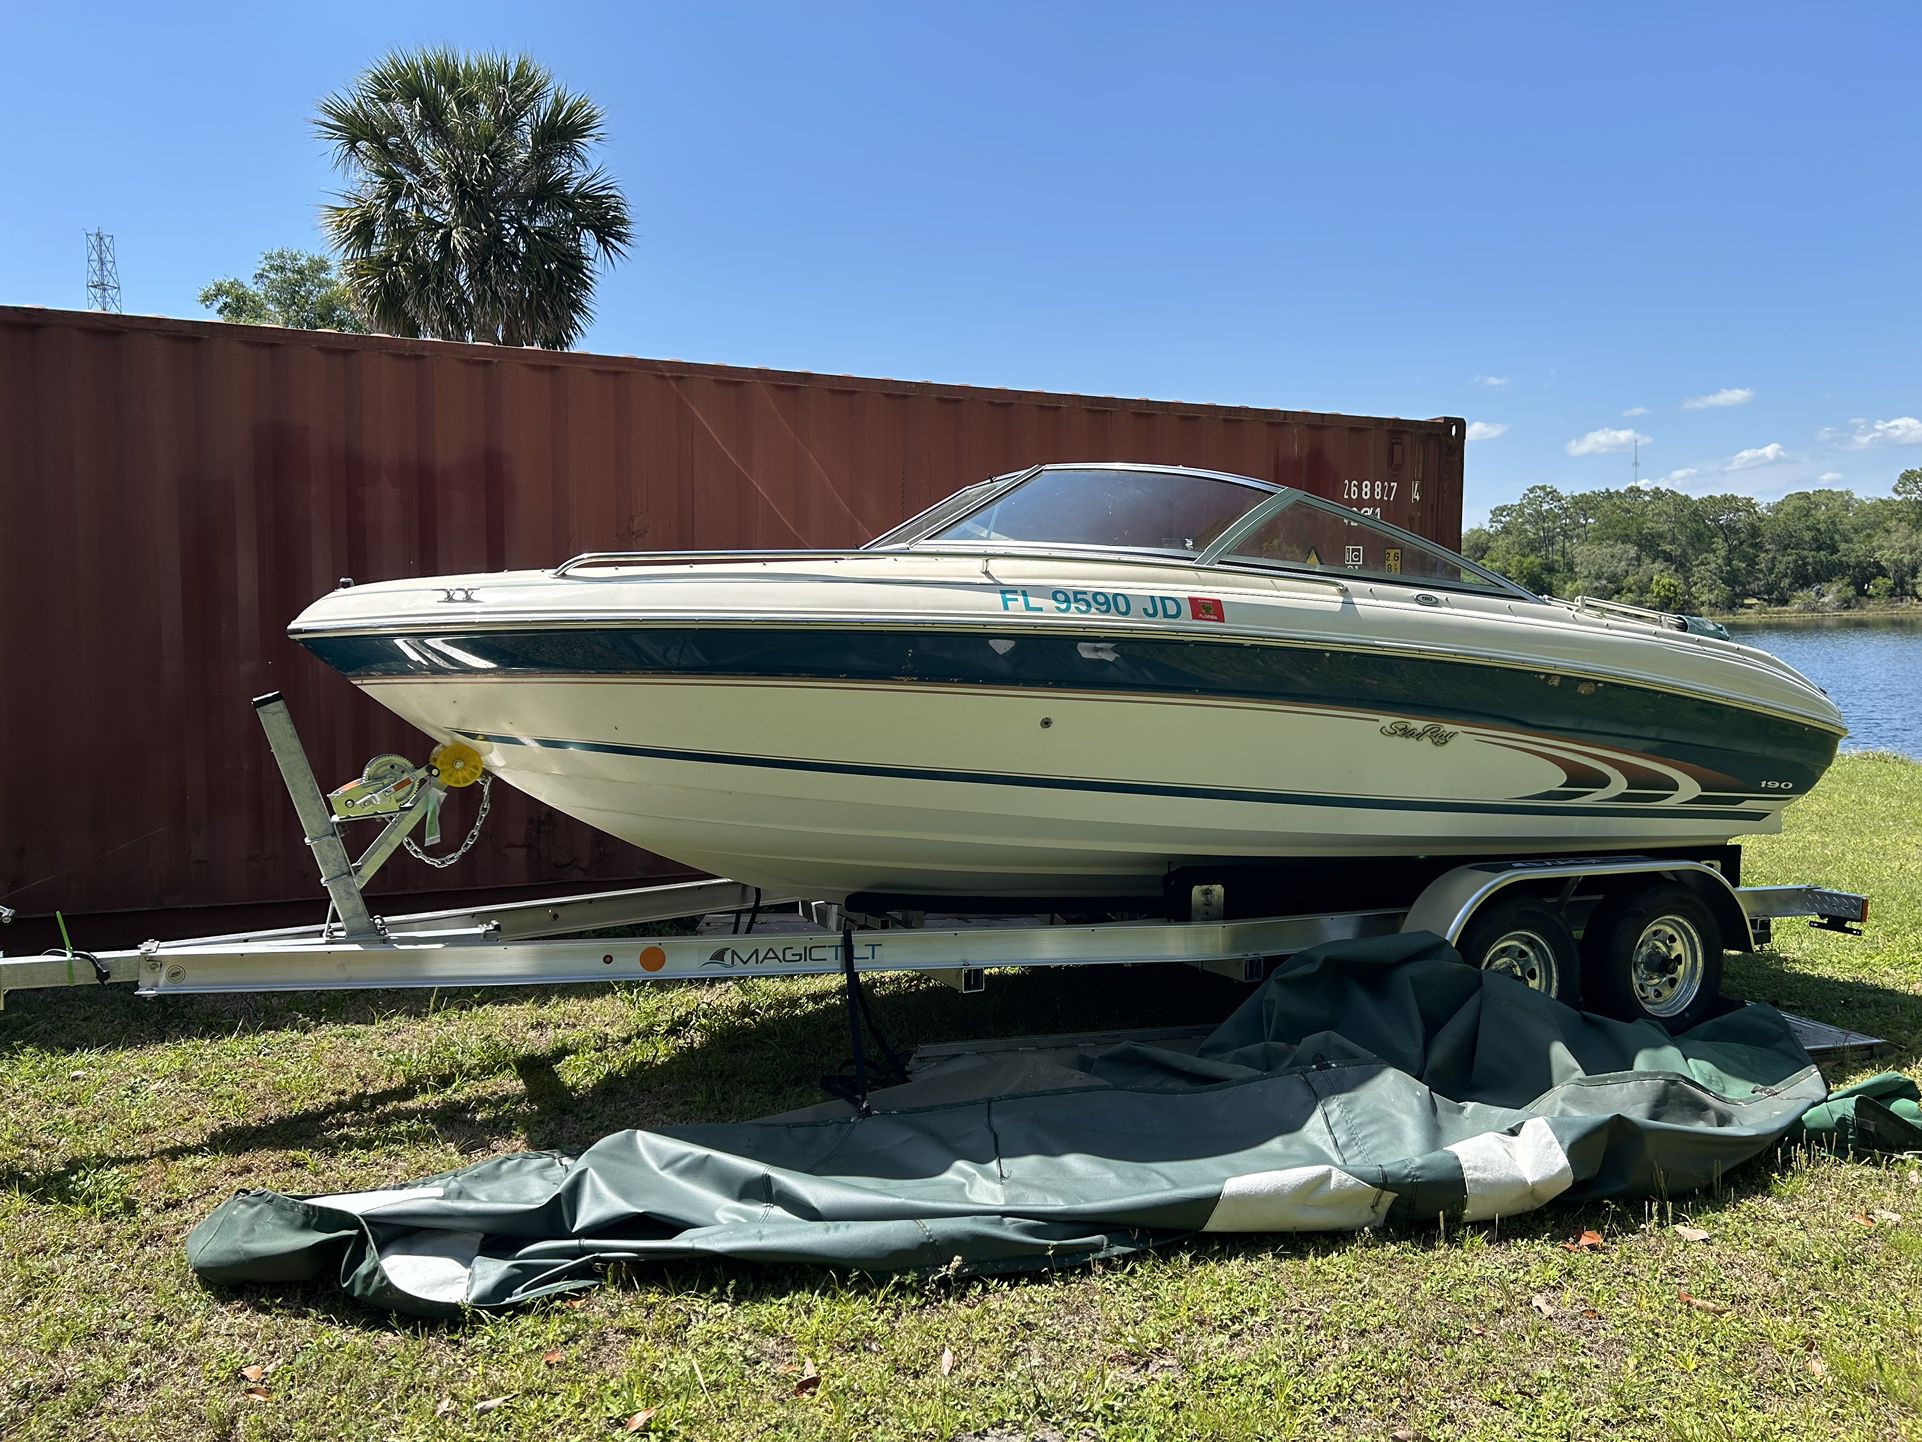 1997 Sea ray Boat And Trailer